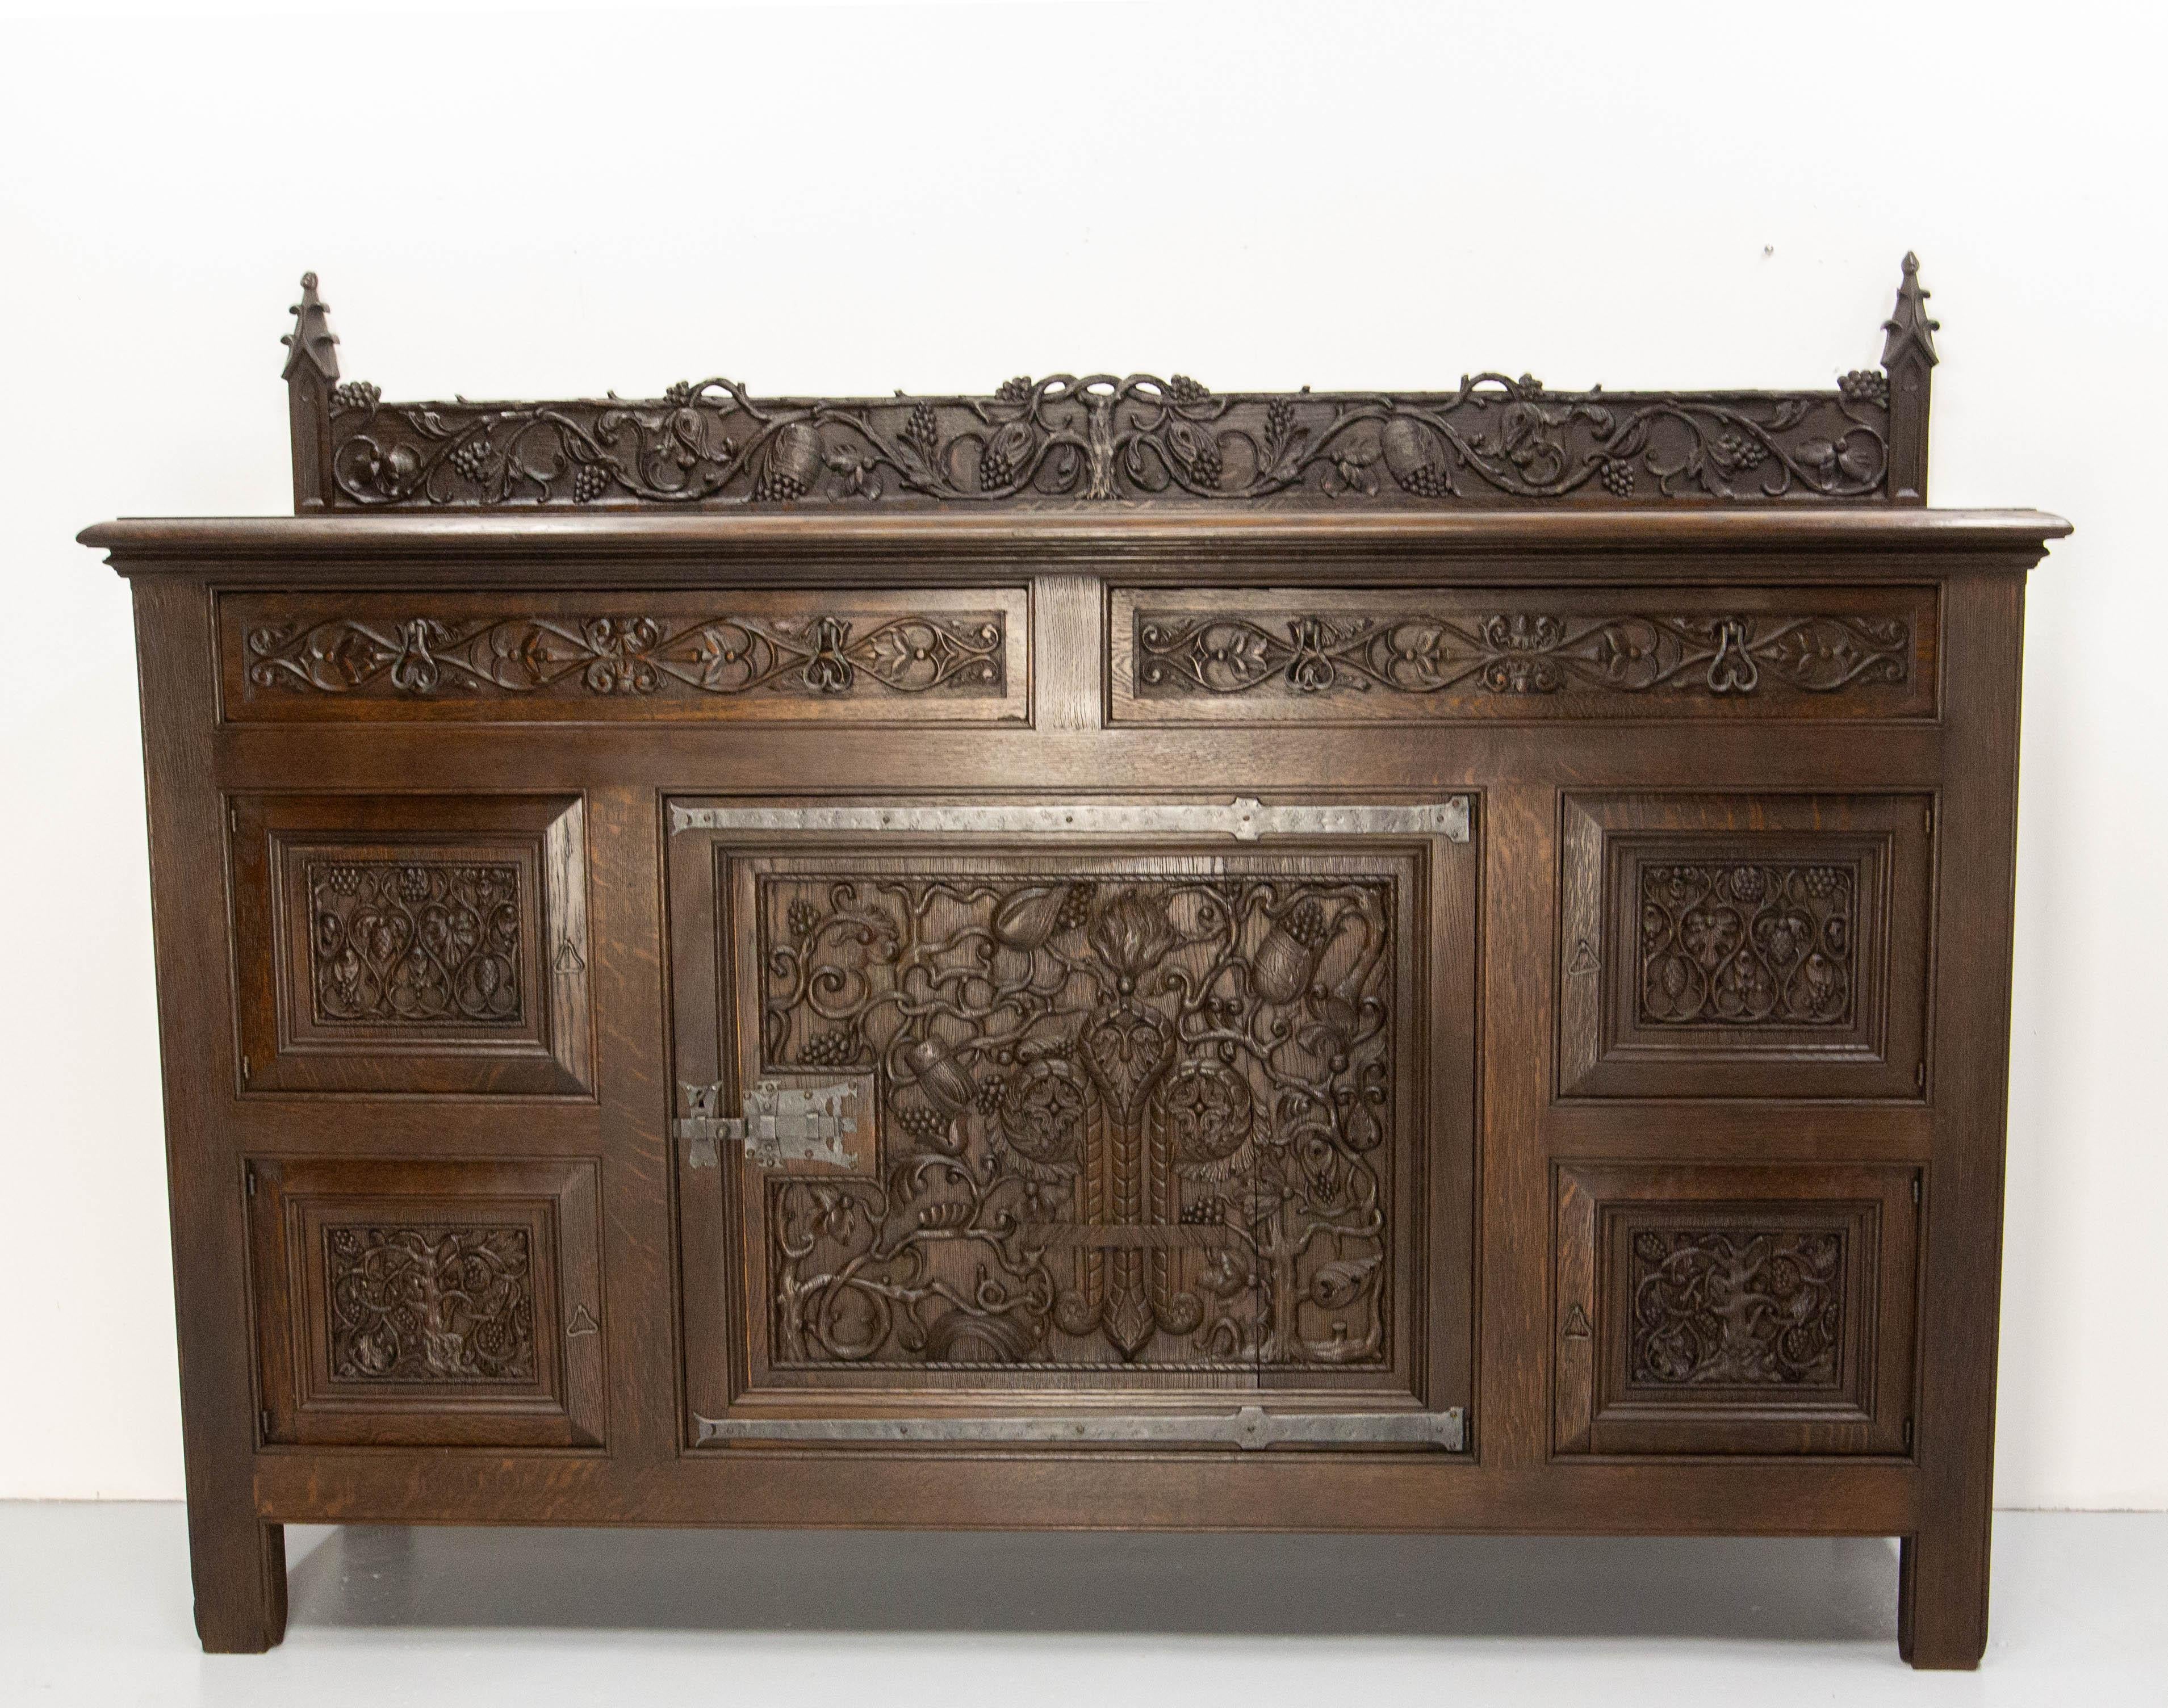 French oak sideboard buffet in the neogothic style.
Adolphe de Beyne was a cabinetmaker from the North of France. 
After the Word War I he specialized in high-end furniture, of which this sideboard is one of the remarkable examples. 
On this buffet,